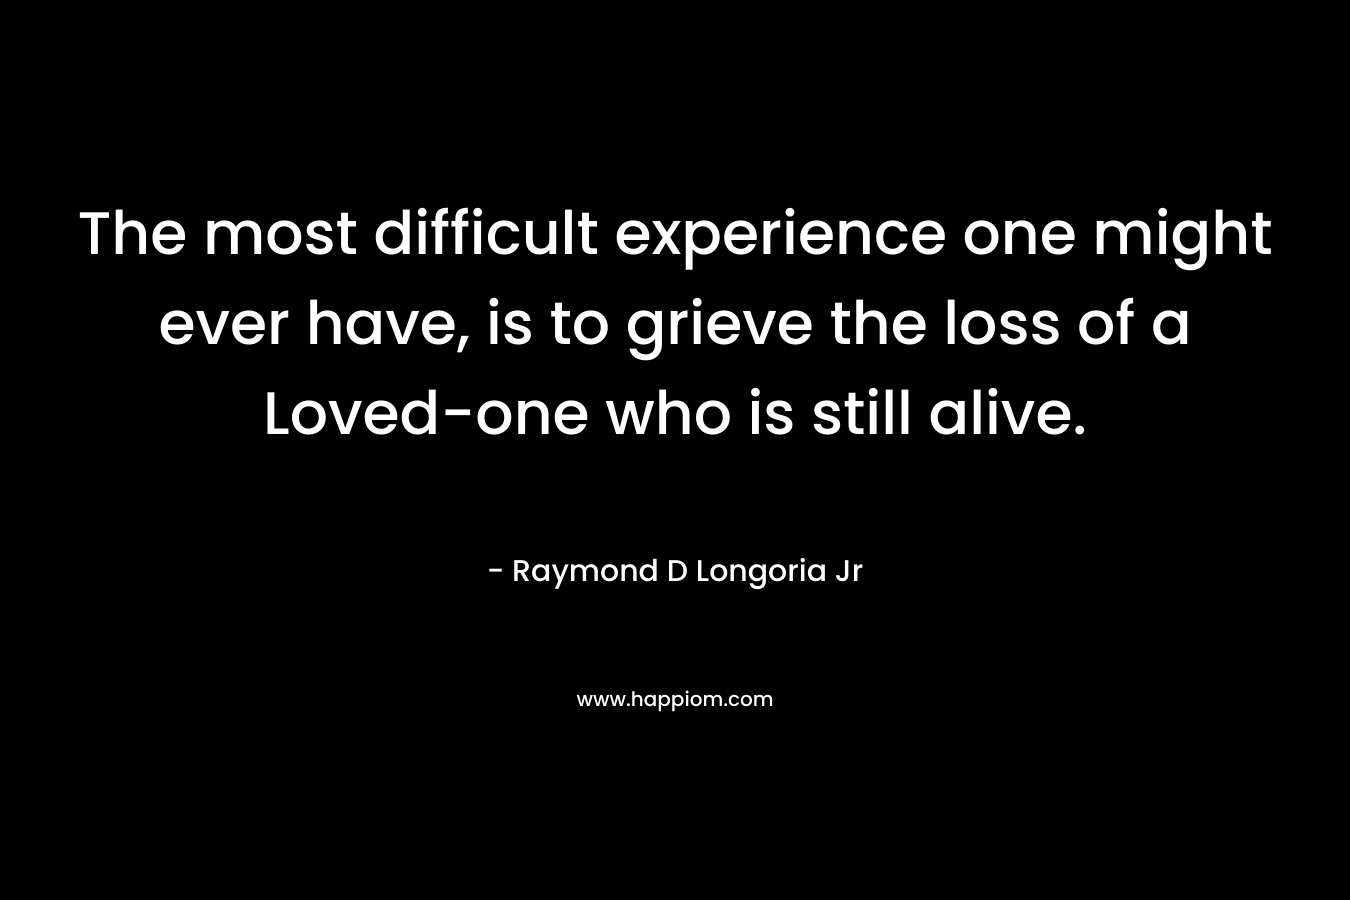 The most difficult experience one might ever have, is to grieve the loss of a Loved-one who is still alive.